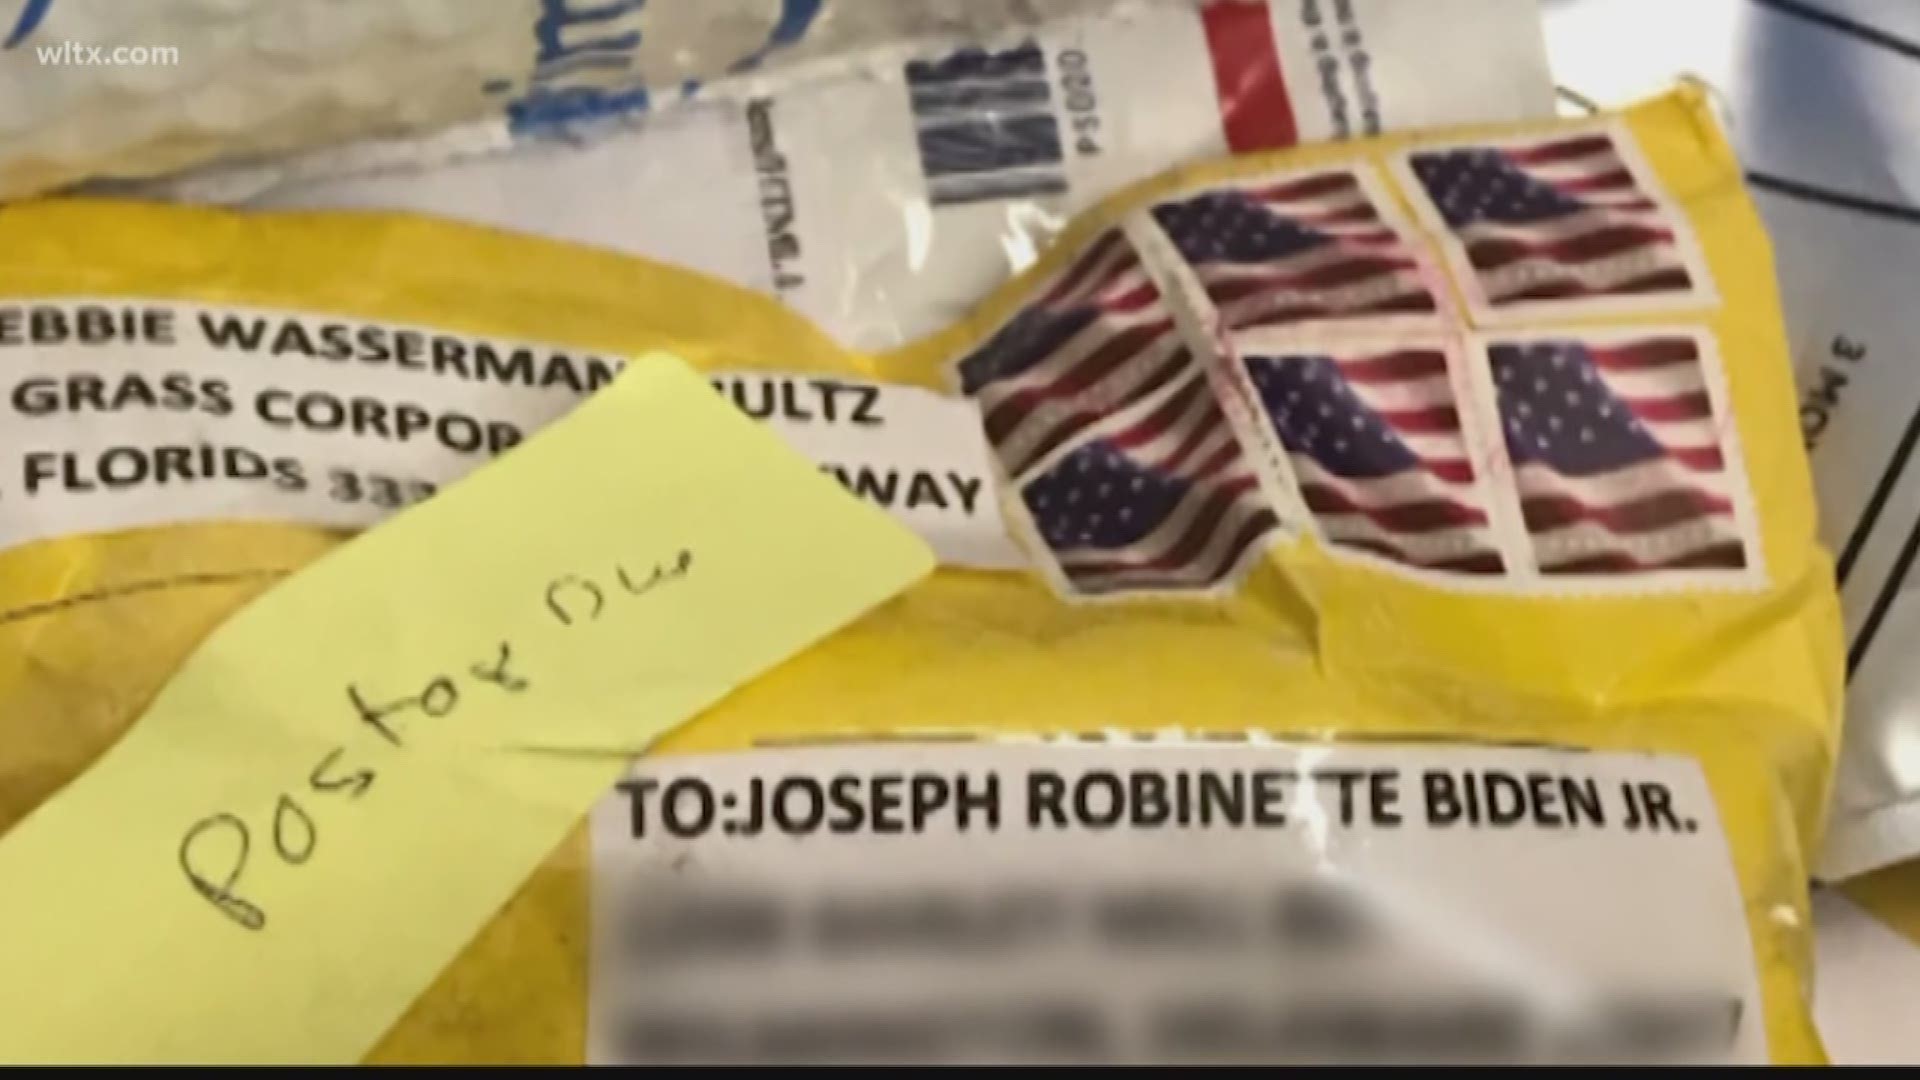 The mail-bomb scare widened Thursday as law enforcement officials seized three more suspicious packages - two addressed to former Vice President Joe Biden and one to actor Robert De Niro - and said they were similar to crude pipe bombs sent to former Pres